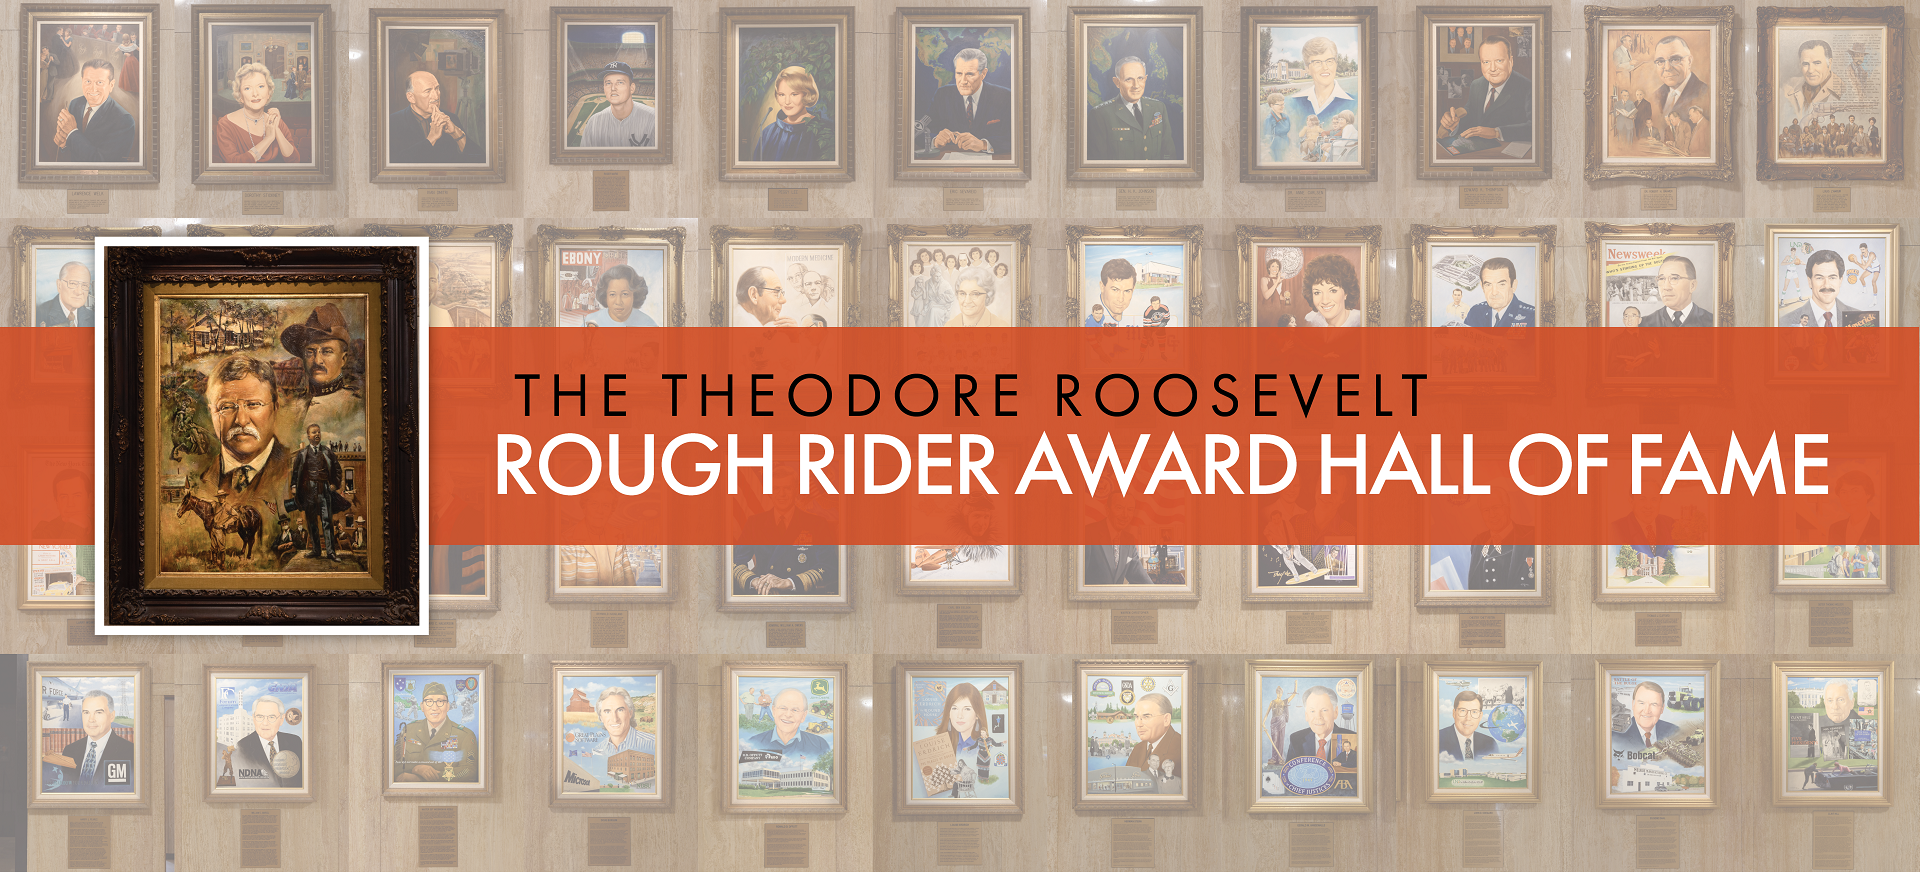 Theodore Roosevelt Rough Rider Award Hall of Fame